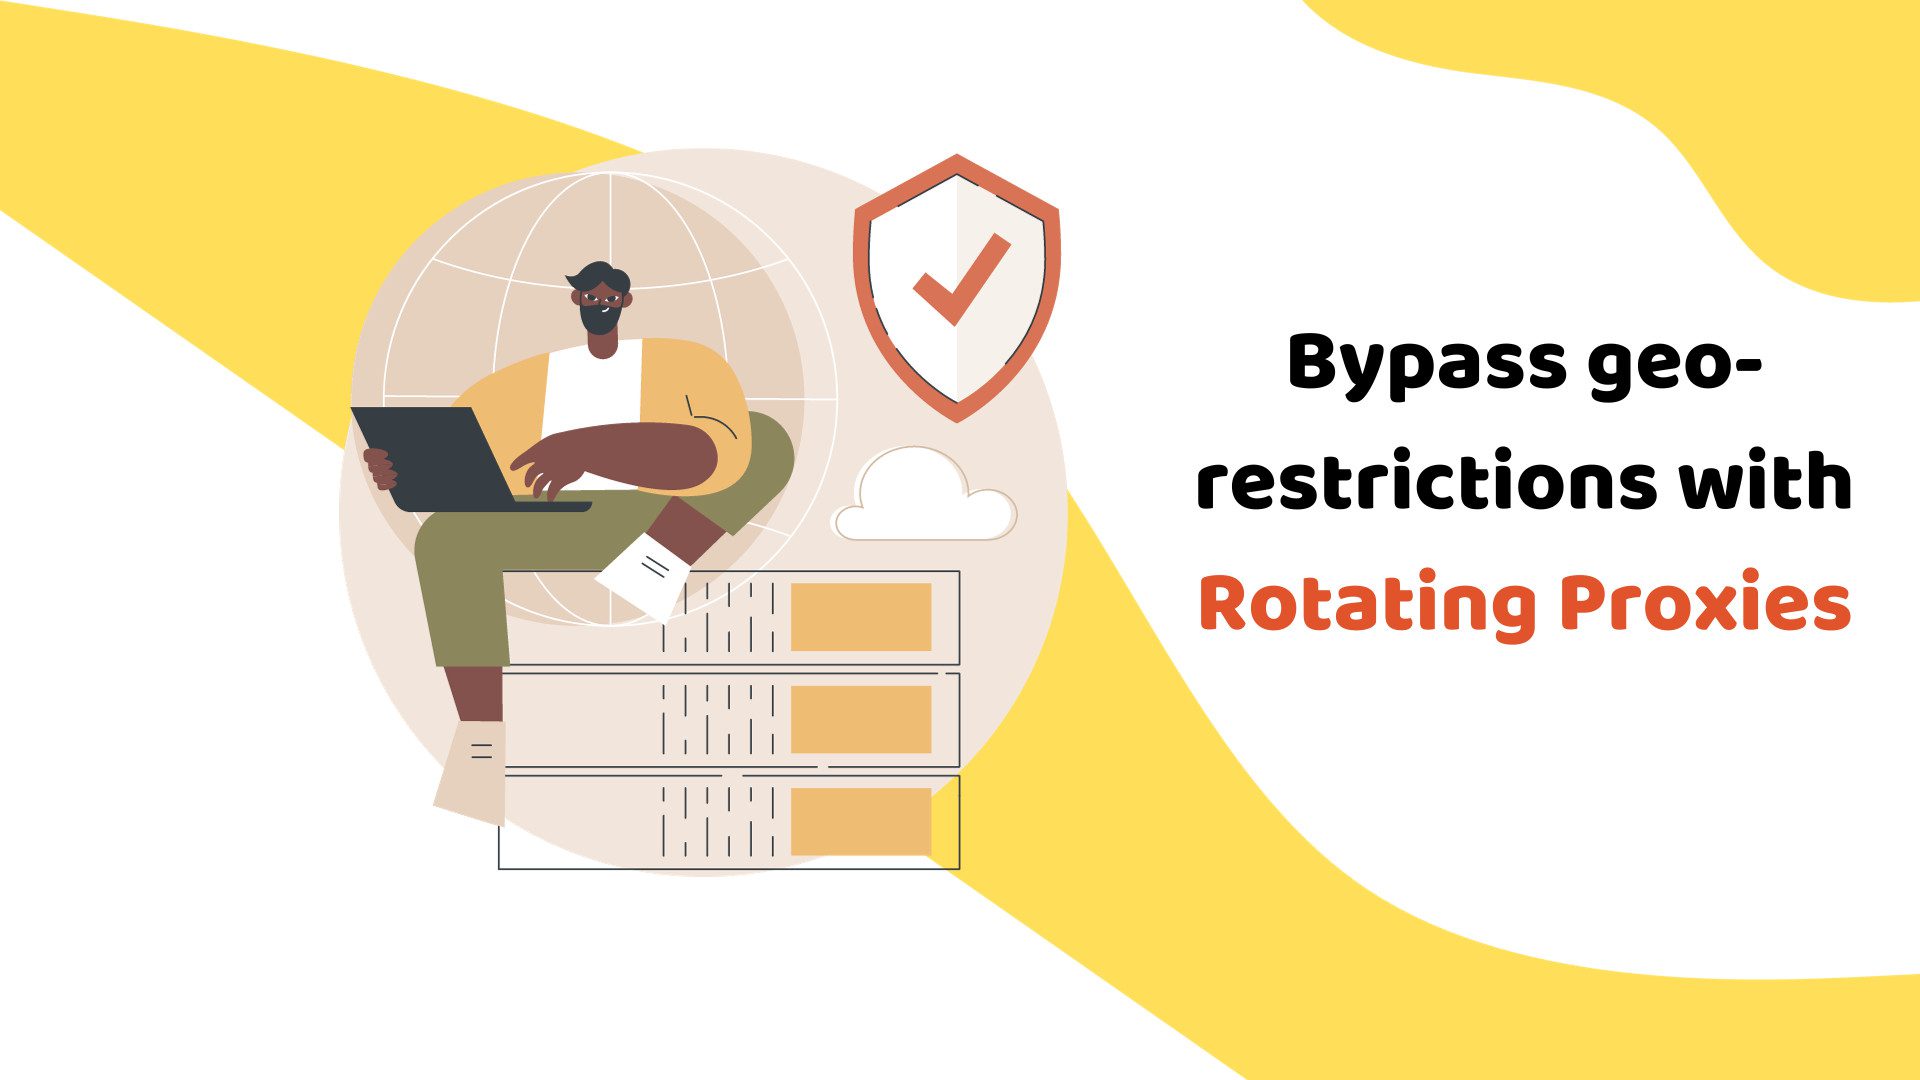 BYPASS GEO-RESTRICTIONS WITH ROTATING PROXIES